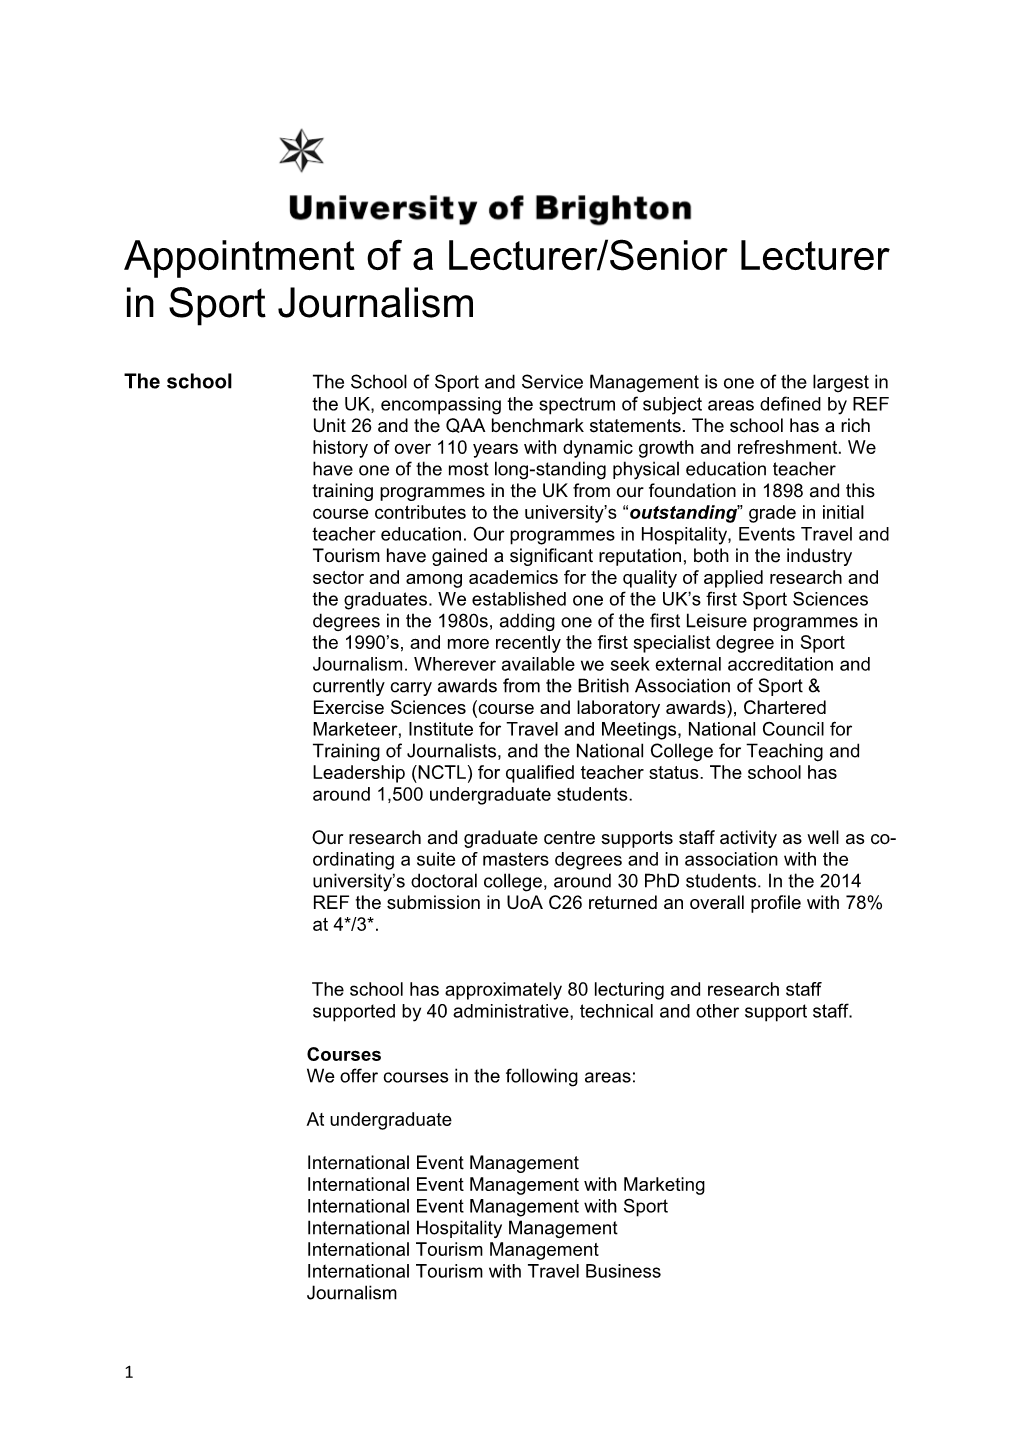 Appointment of a Lecturer/Senior Lecturer in Sport Journalism